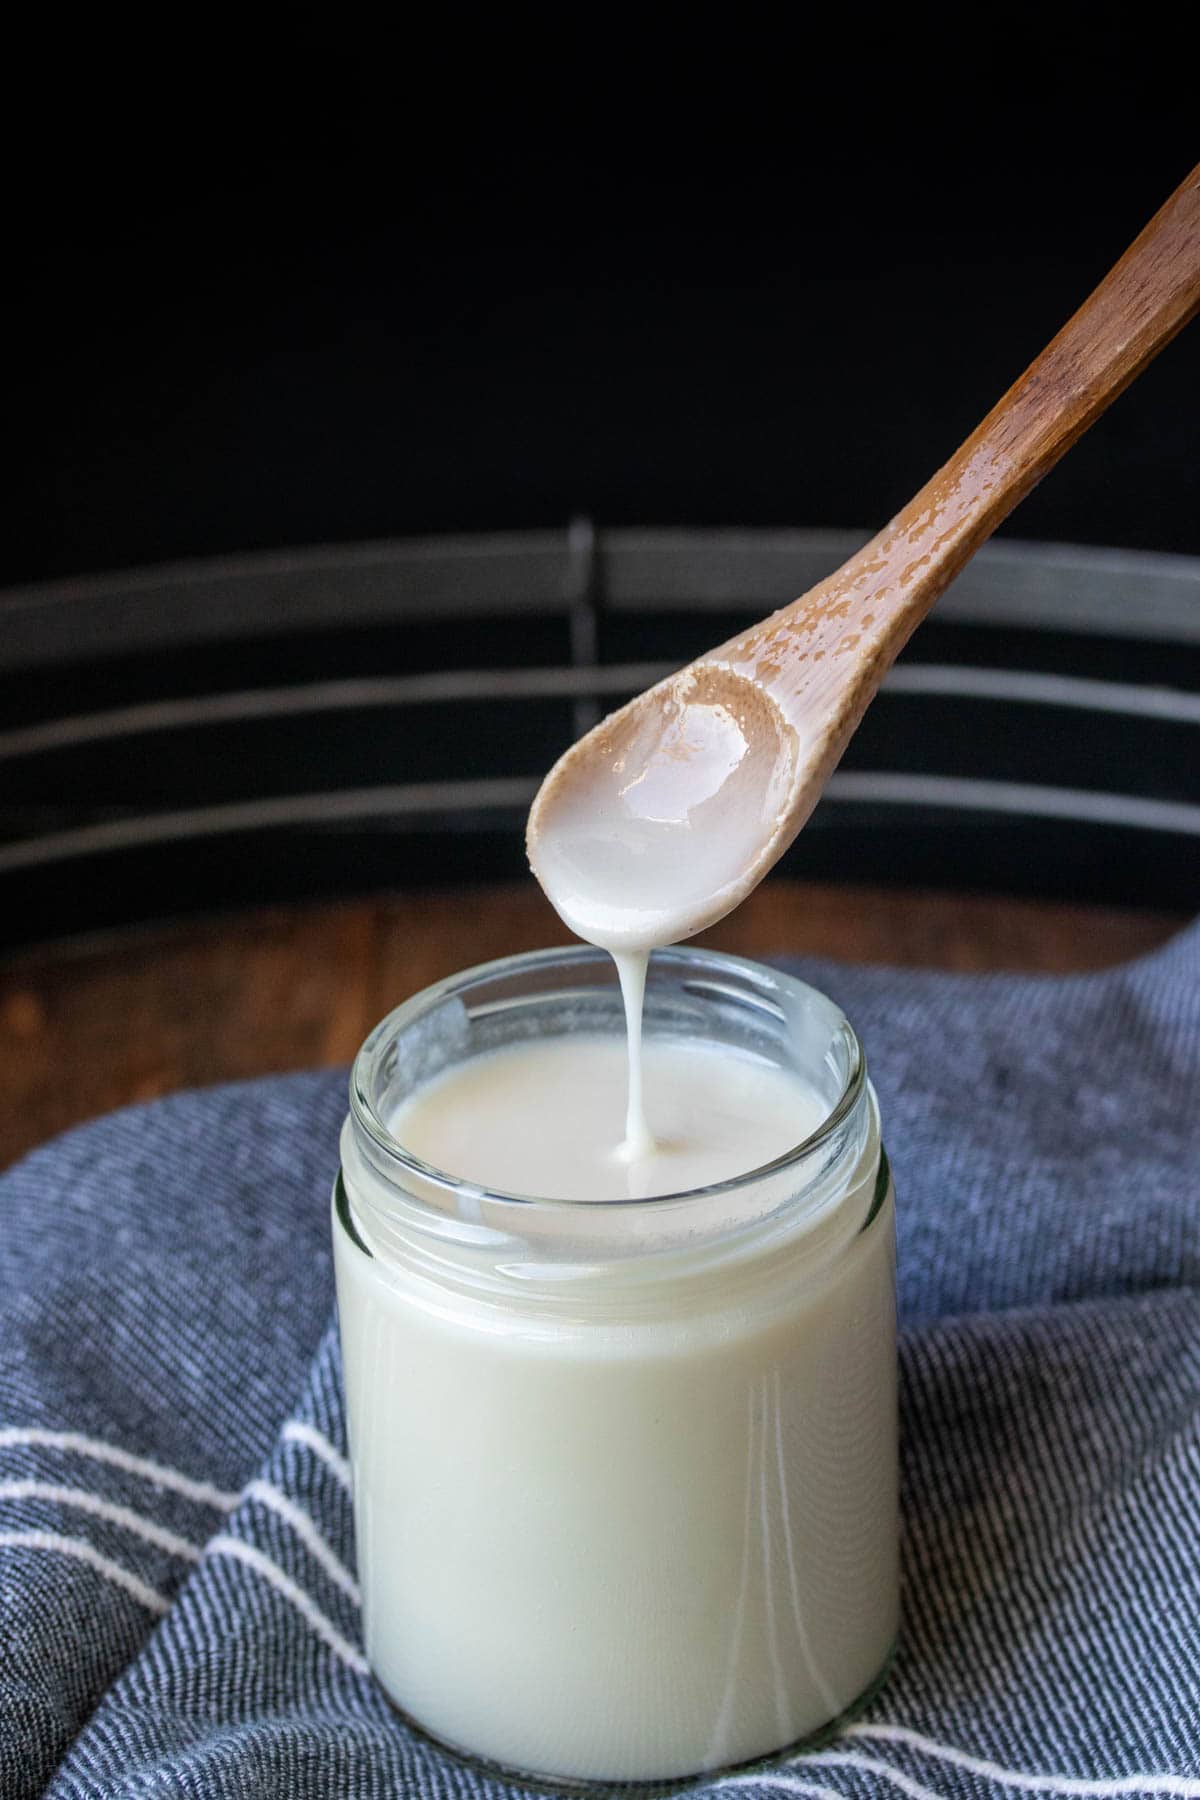 Wooden spoon taking coconut butter out of a glass jar